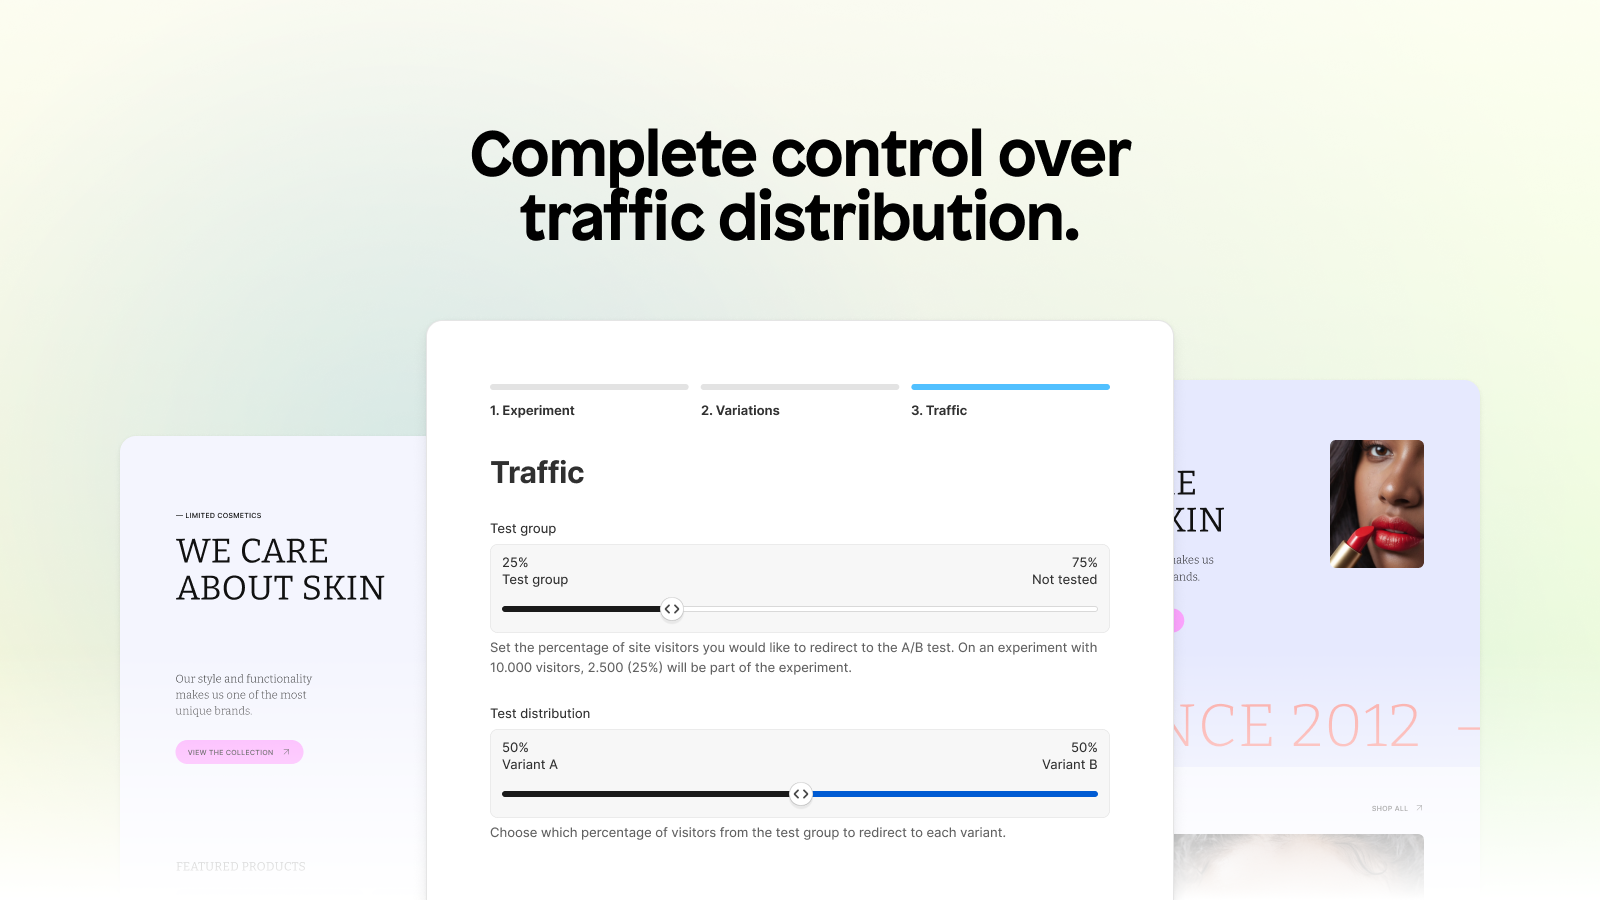 Complete control over traffic distribution